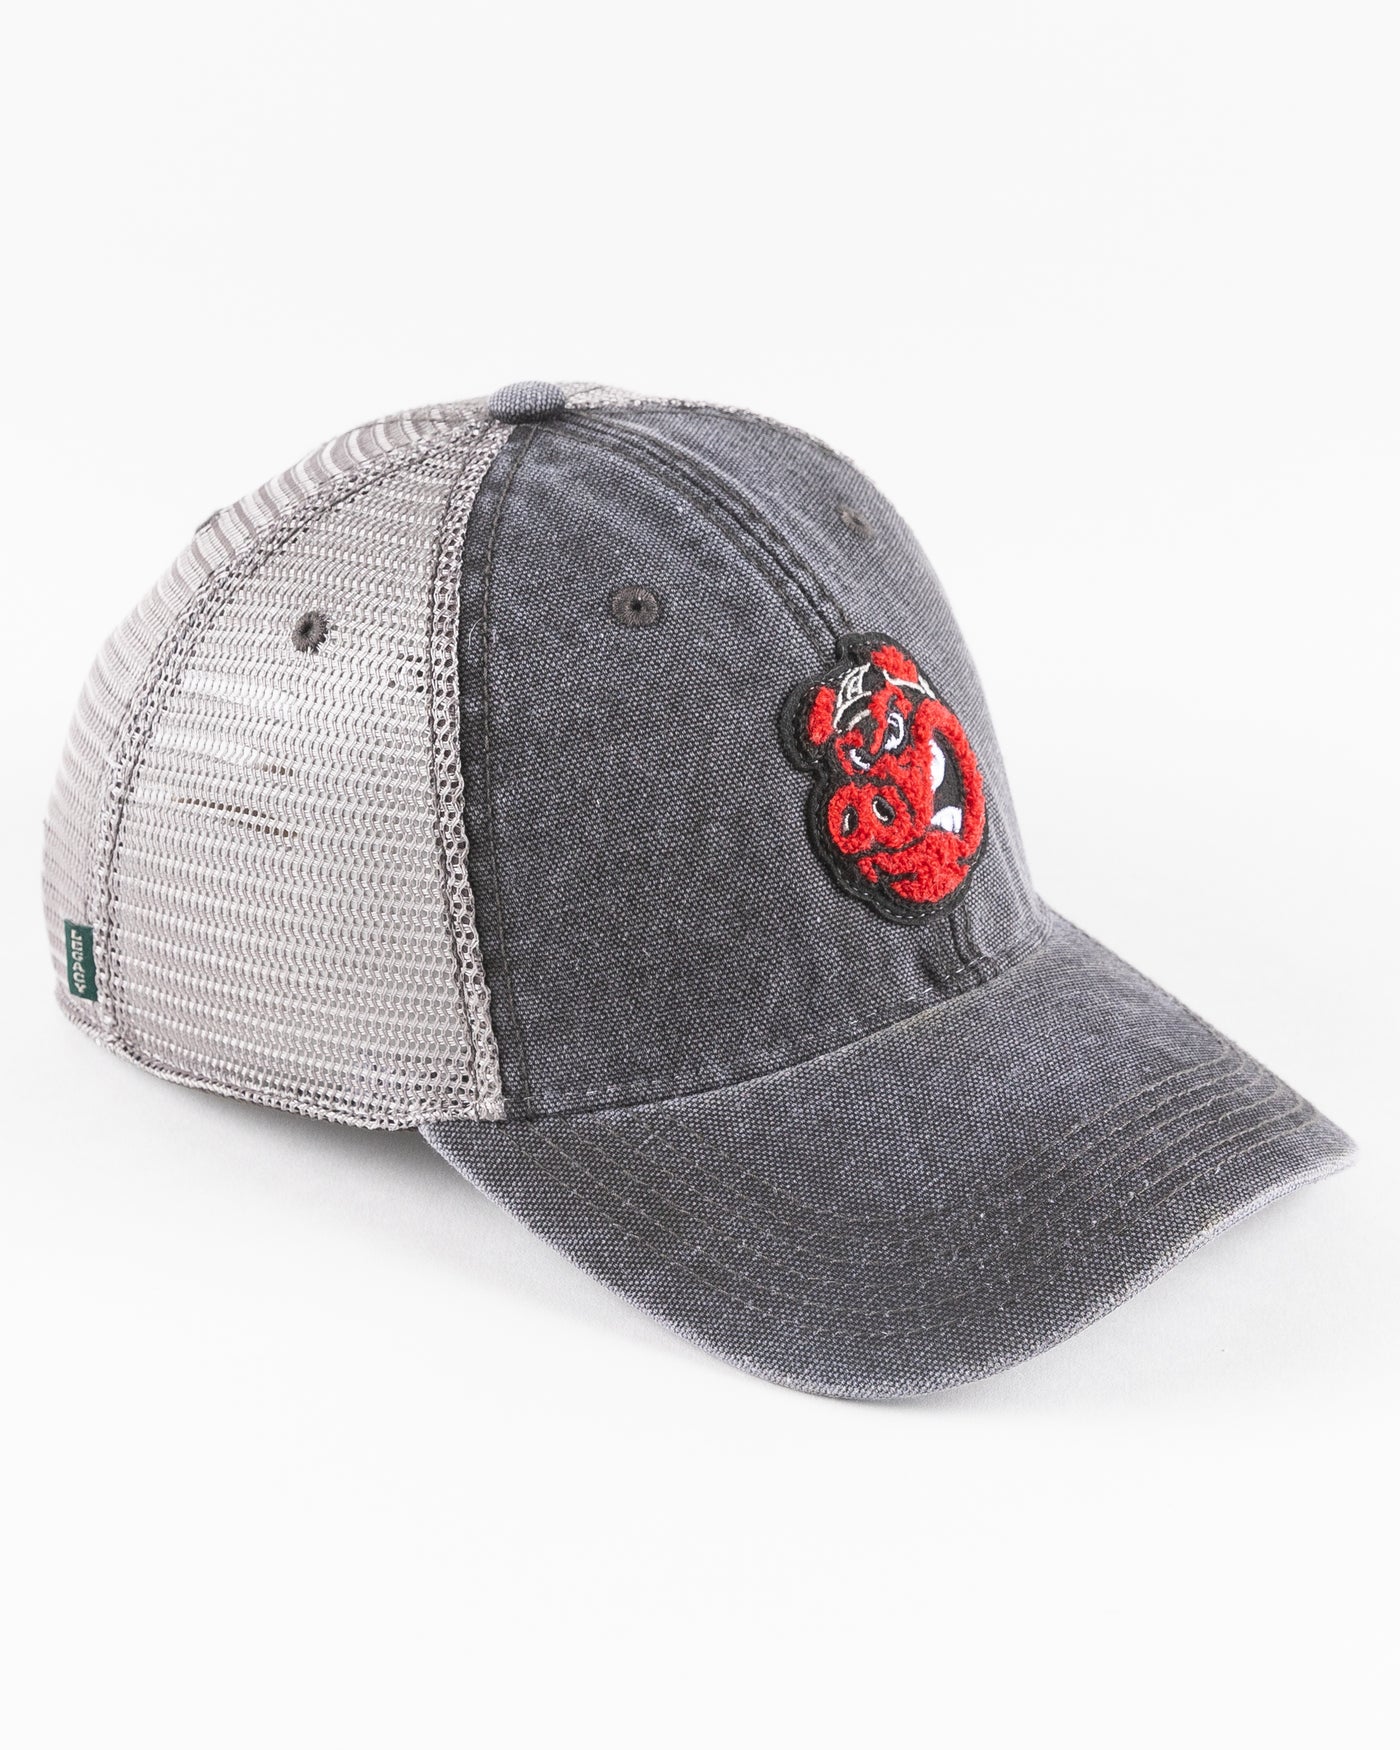 black/grey trucker cap with Rockford IceHogs Hammy embroidered design - right angle lay flat 